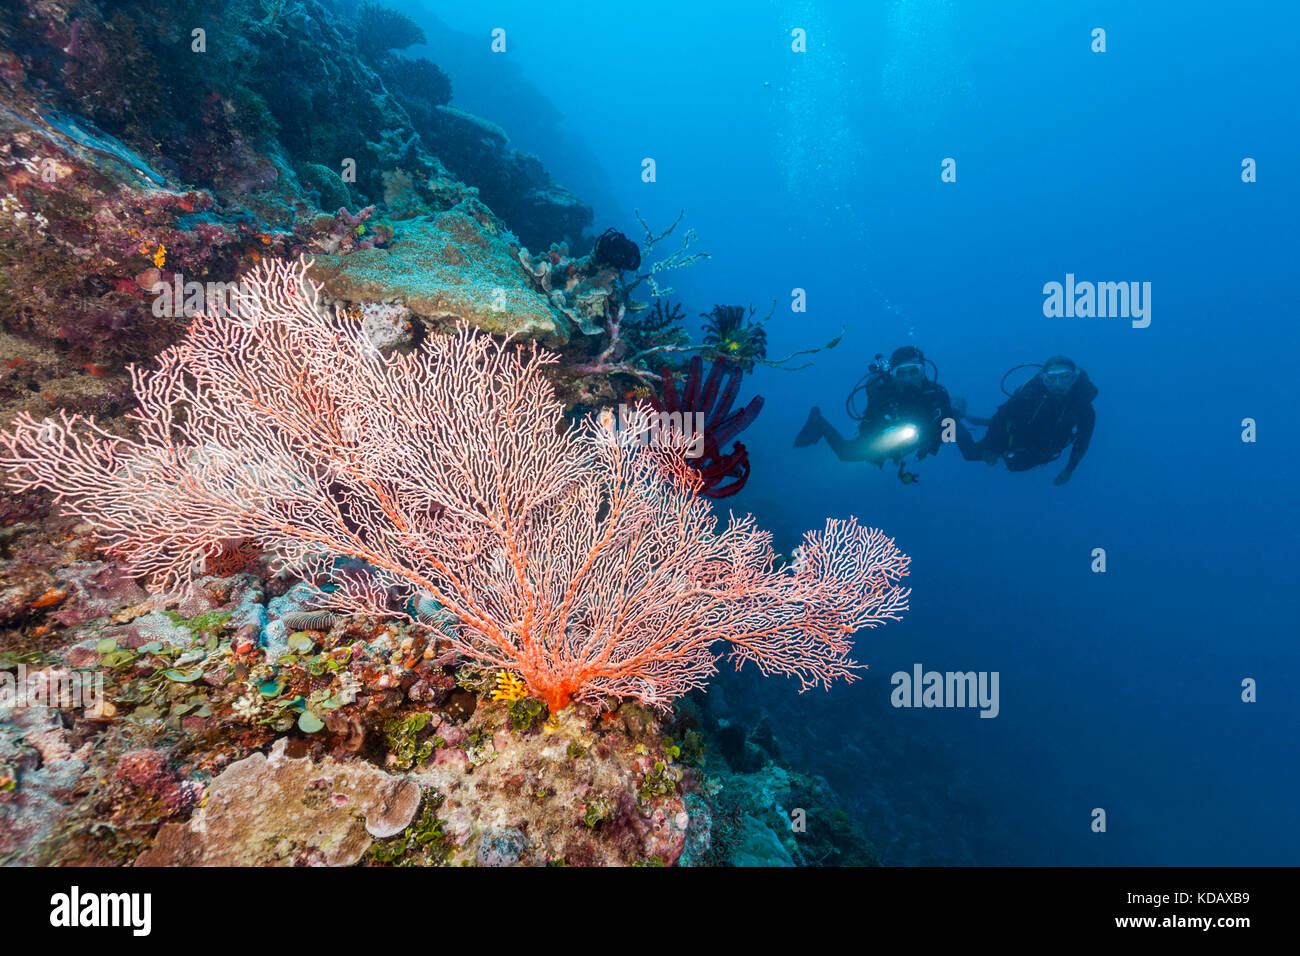 Divers looking at colourfal sea fans at St Crispins Reef, Great Barrier Reef Marine Park, Port Douglas, Queensland, Australia Stock Photo